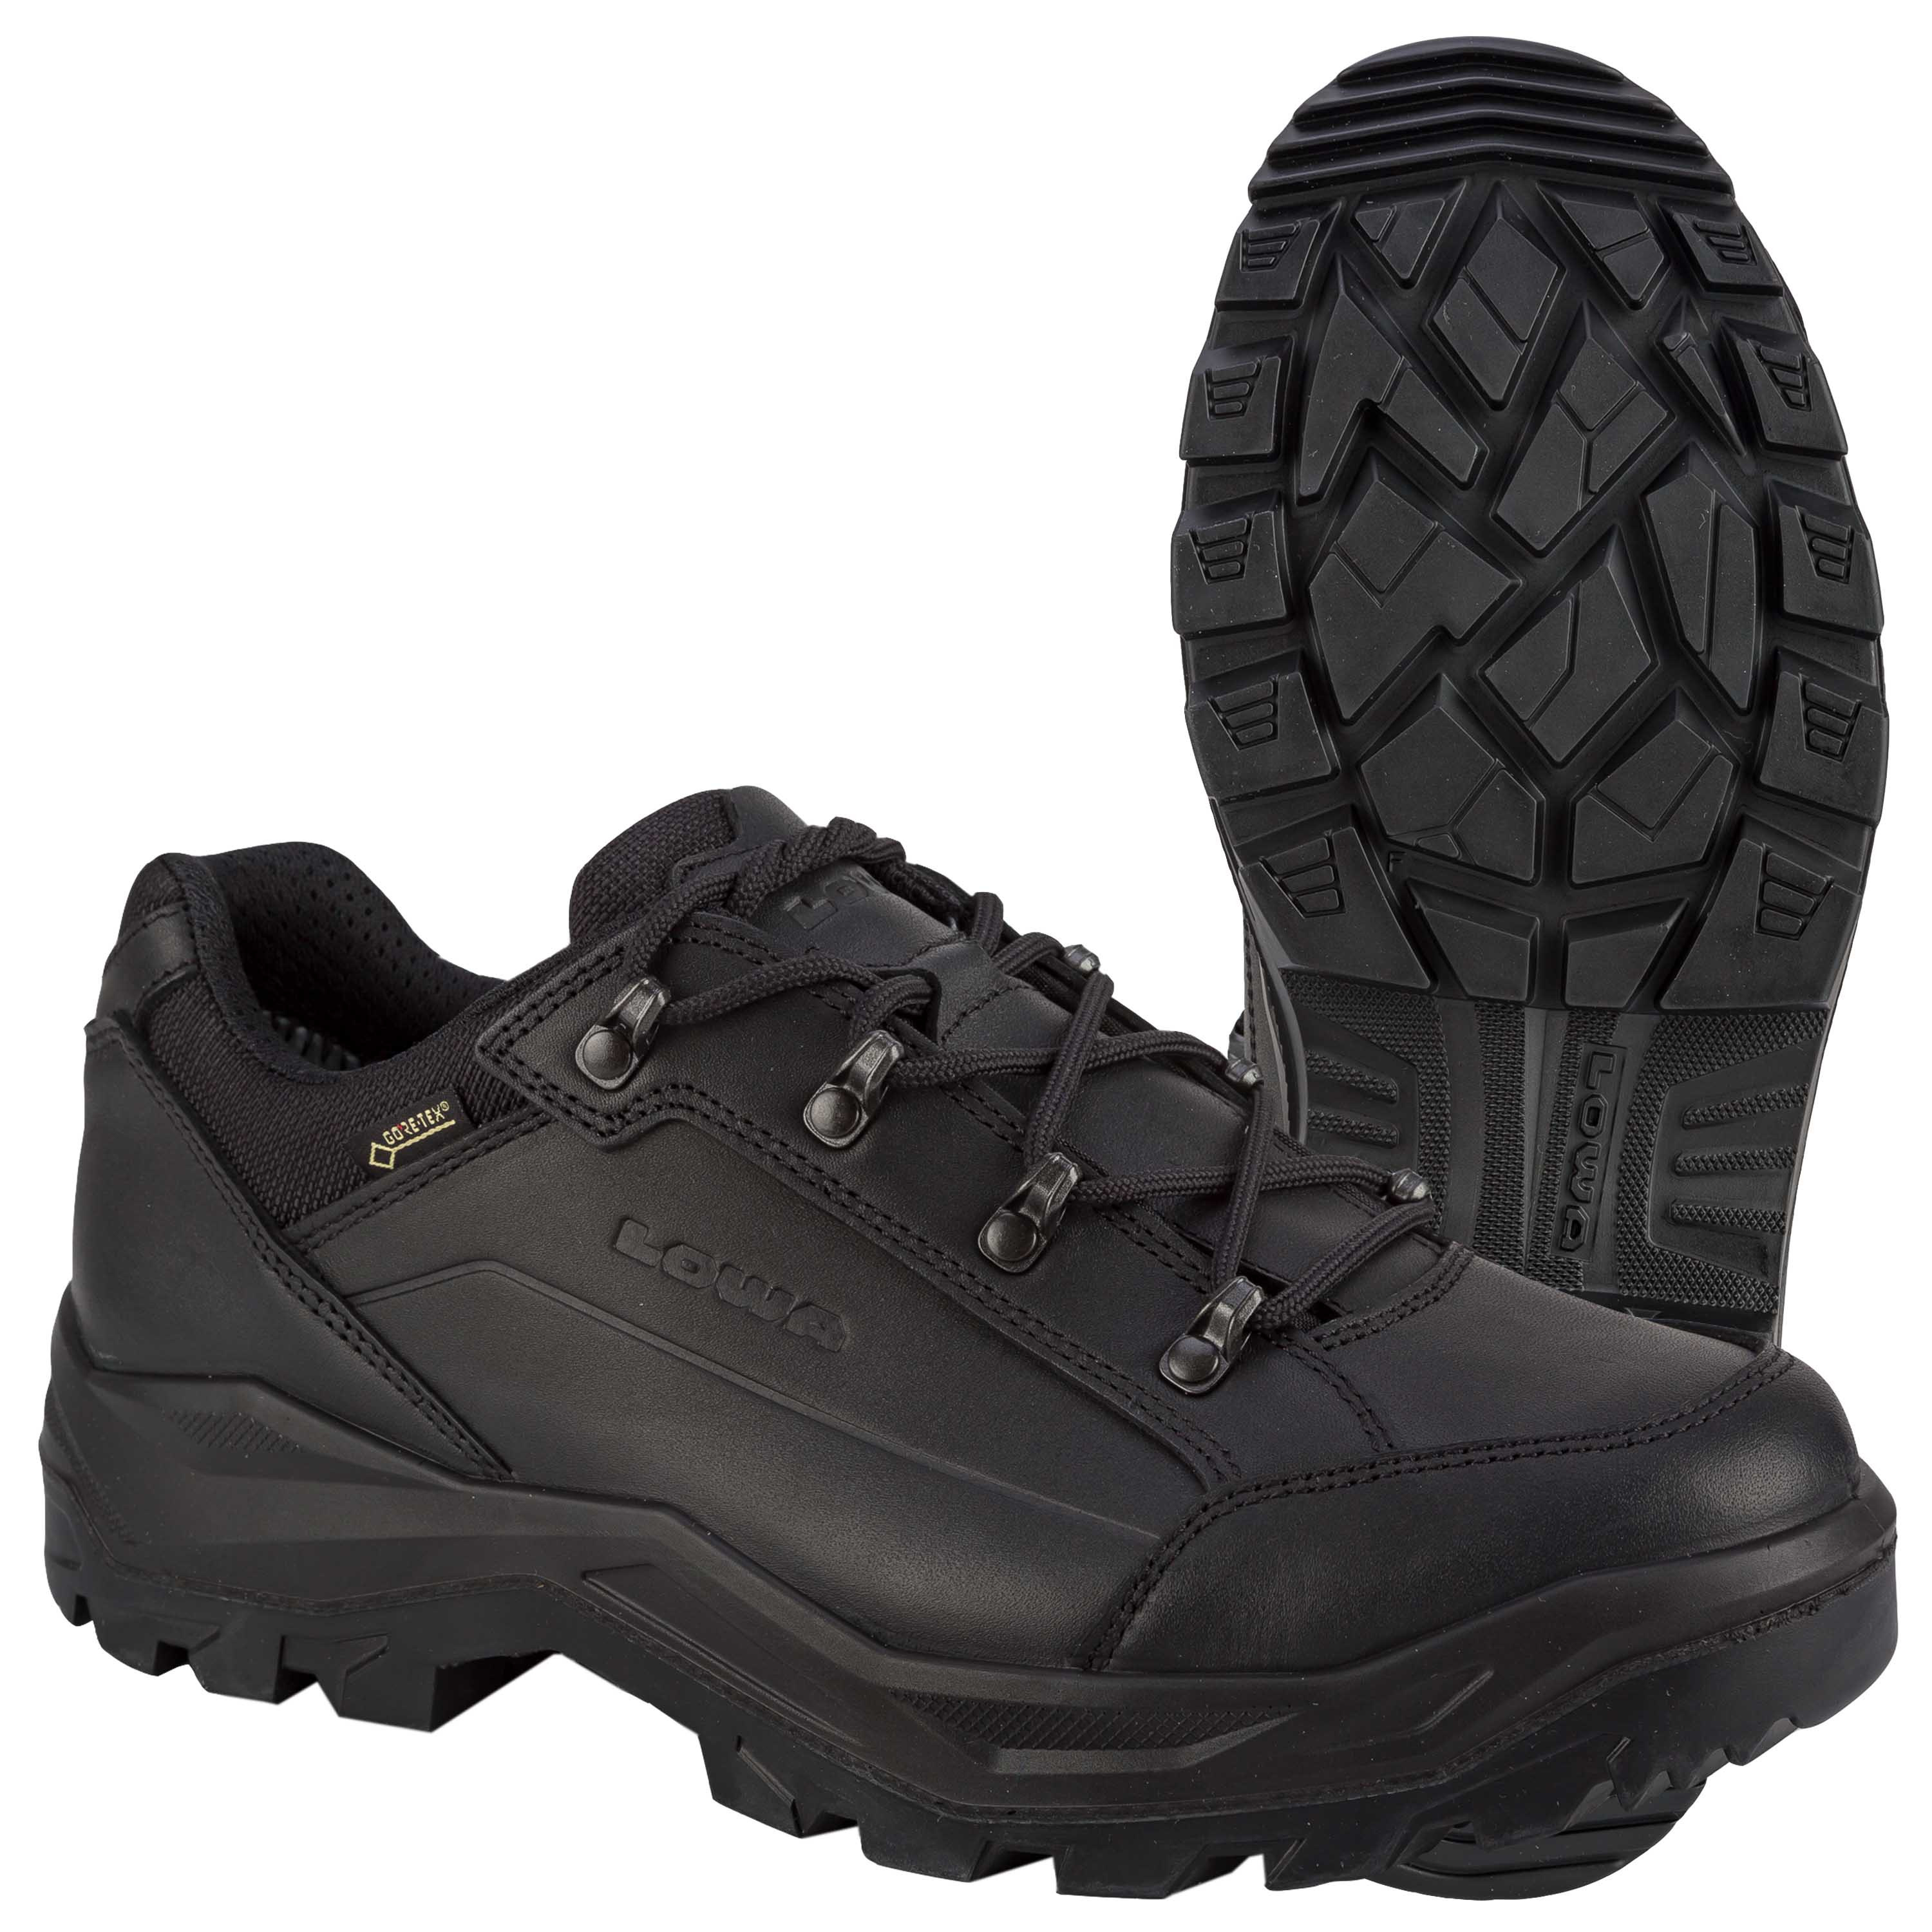 Low protective shoes RENEGADE II GTX LO TF MF - "500612"